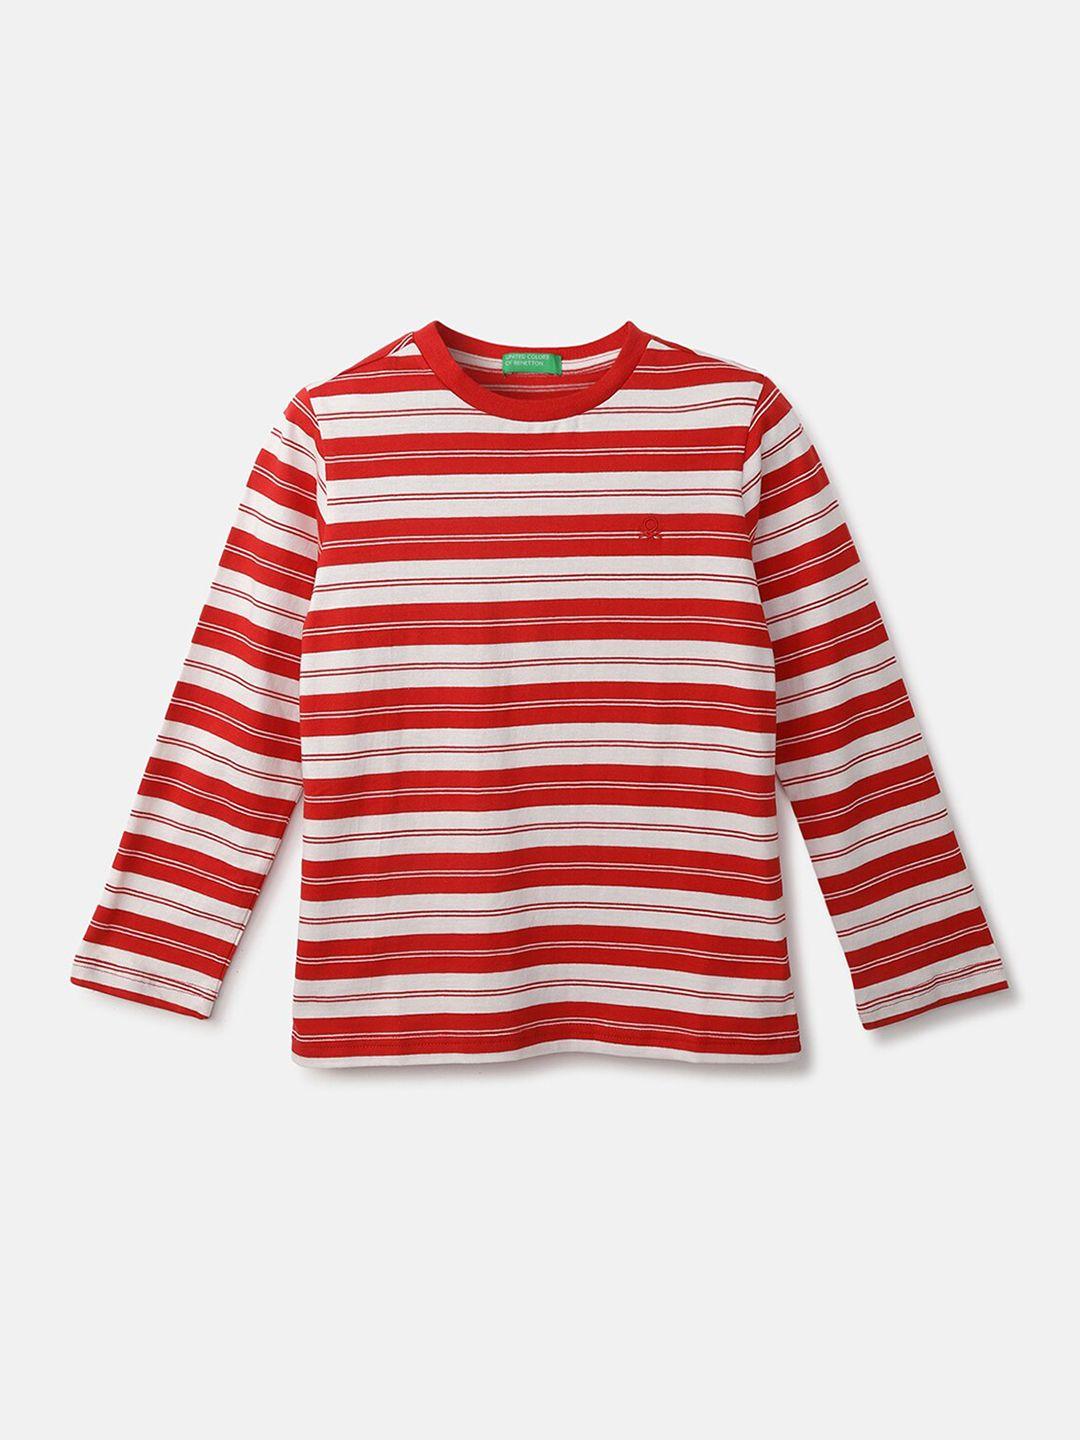 United Colors of Benetton Boys Red Striped T-shirt